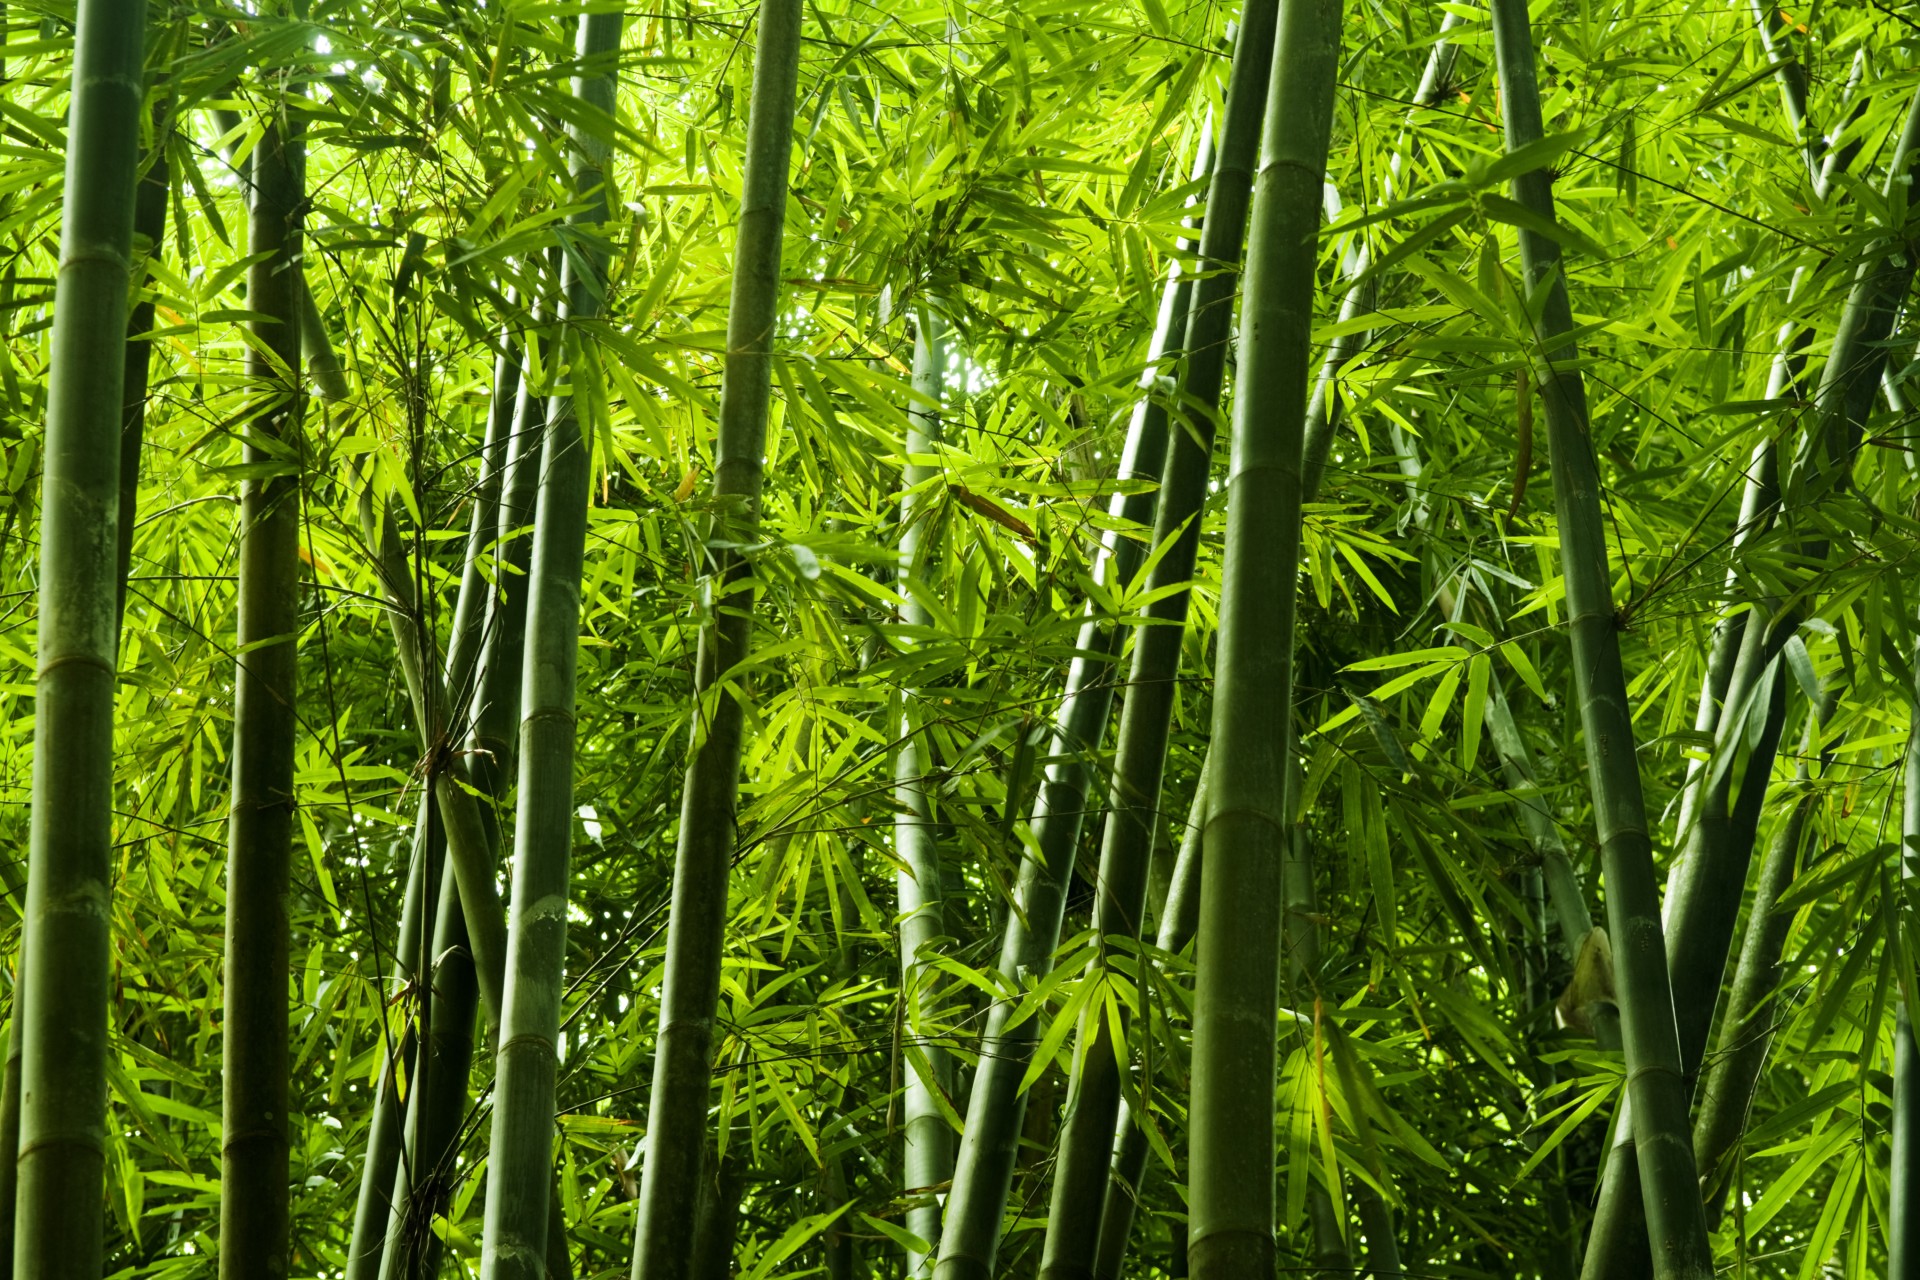 What You Need To Know About Bamboo and Bamboo Straw